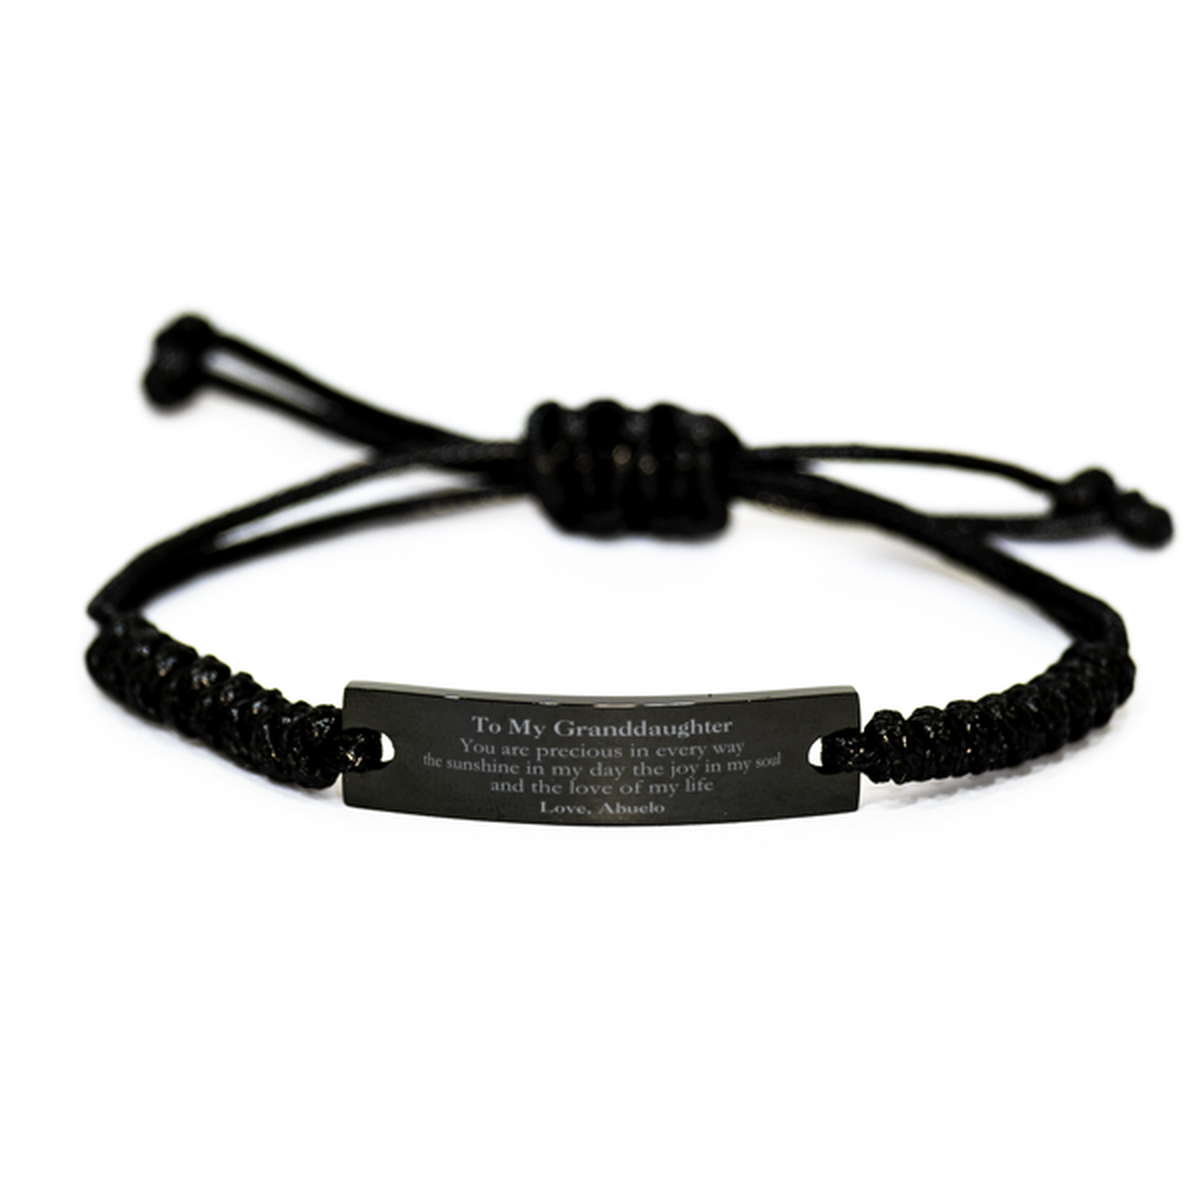 Graduation Gifts for Granddaughter Black Rope Bracelet Present from Abuelo, Christmas Granddaughter Birthday Gifts Granddaughter You are precious in every way the sunshine in my day. Love, Abuelo